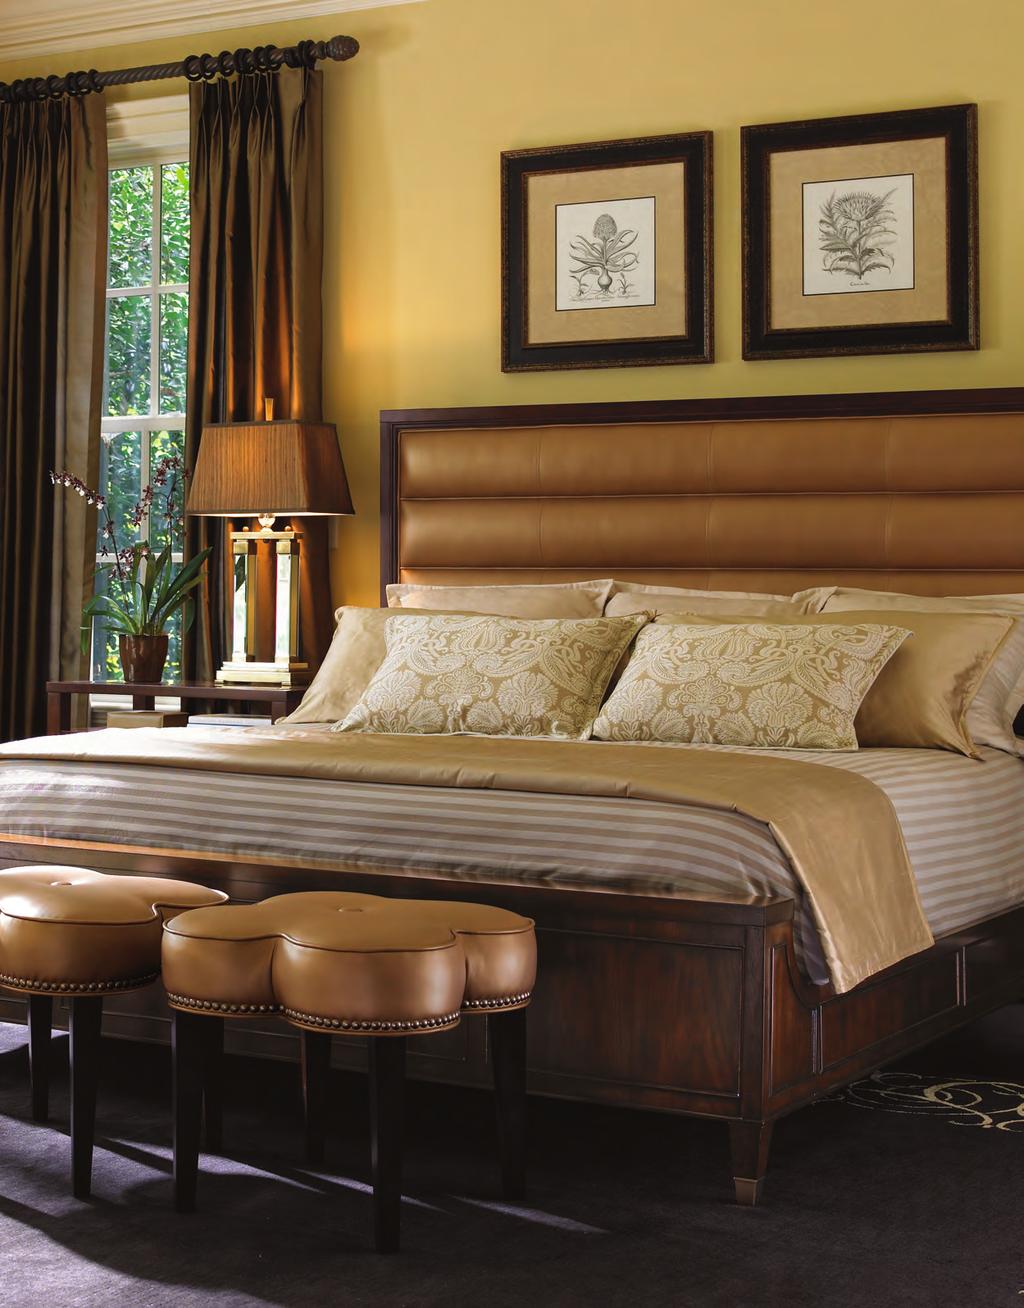 If your style leans to the more traditional, the Palais Bed features a dramatic arched headboard in a sunburst pattern of cathedral walnut, with an elegant interlocking ring pattern of gold-tipped